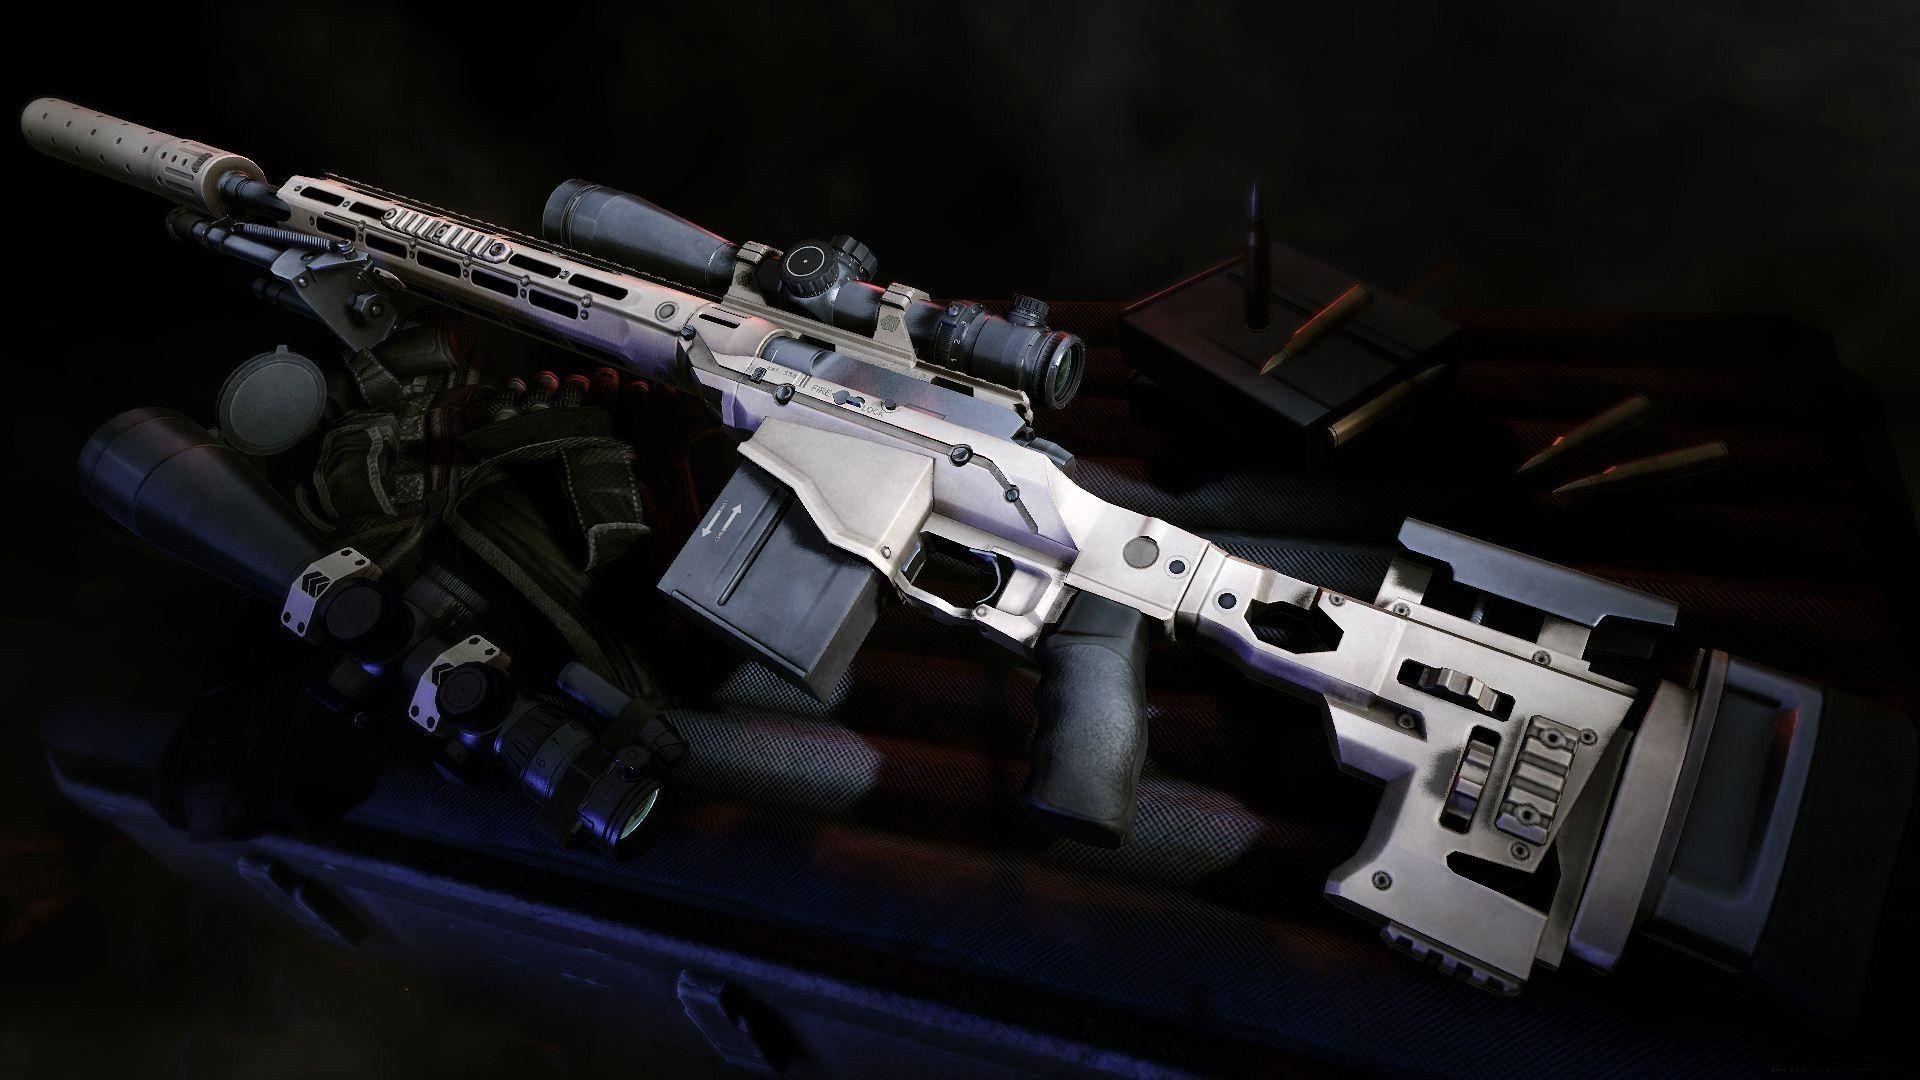 Sniper Rifle Wallpapers Hd